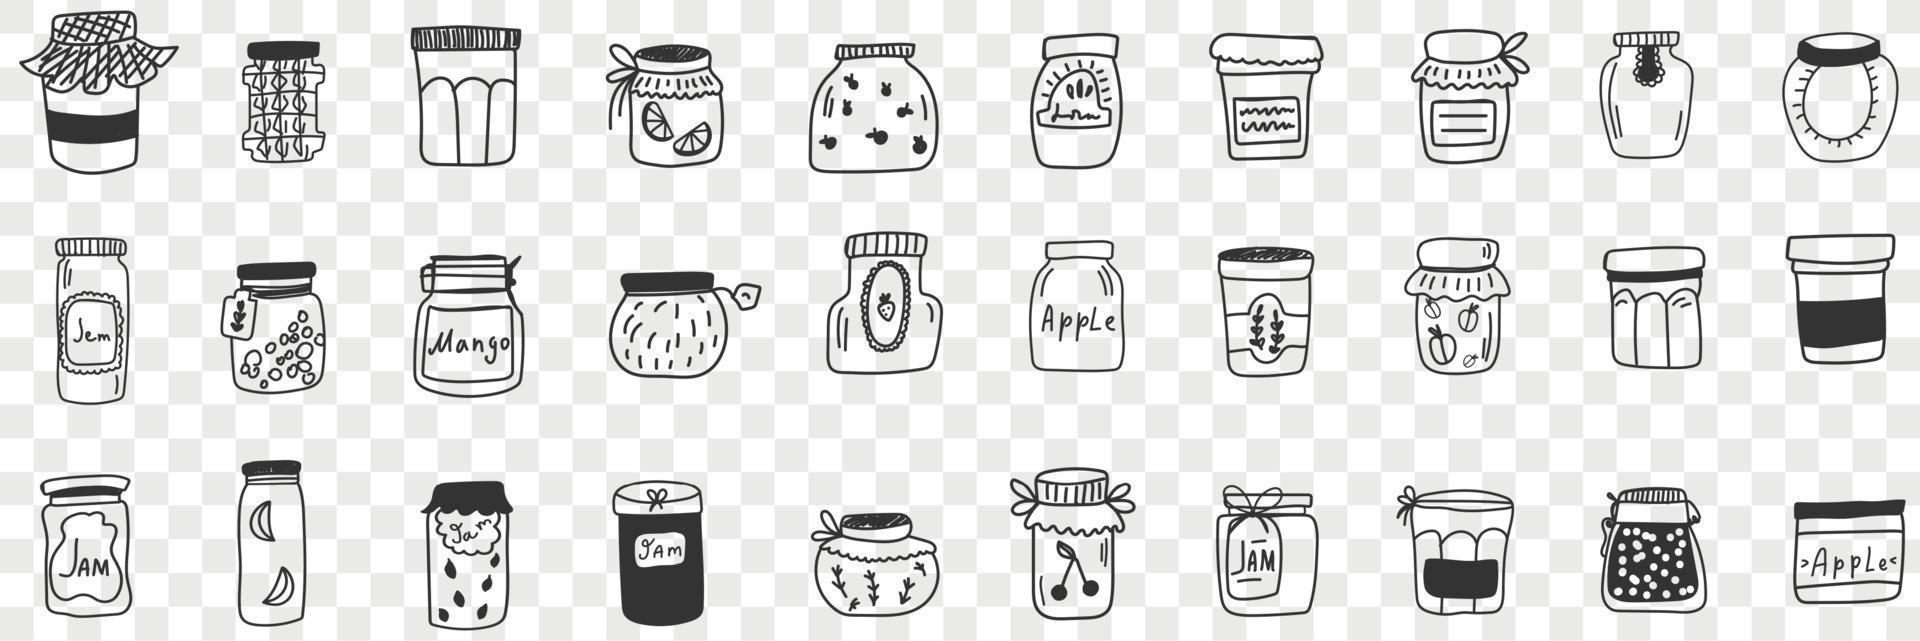 Jars and containers for food doodle set. Collection of hand drawn various shapes and forms of glass jars for keeping preserved food jam grains and cereals isolated on transparent background vector